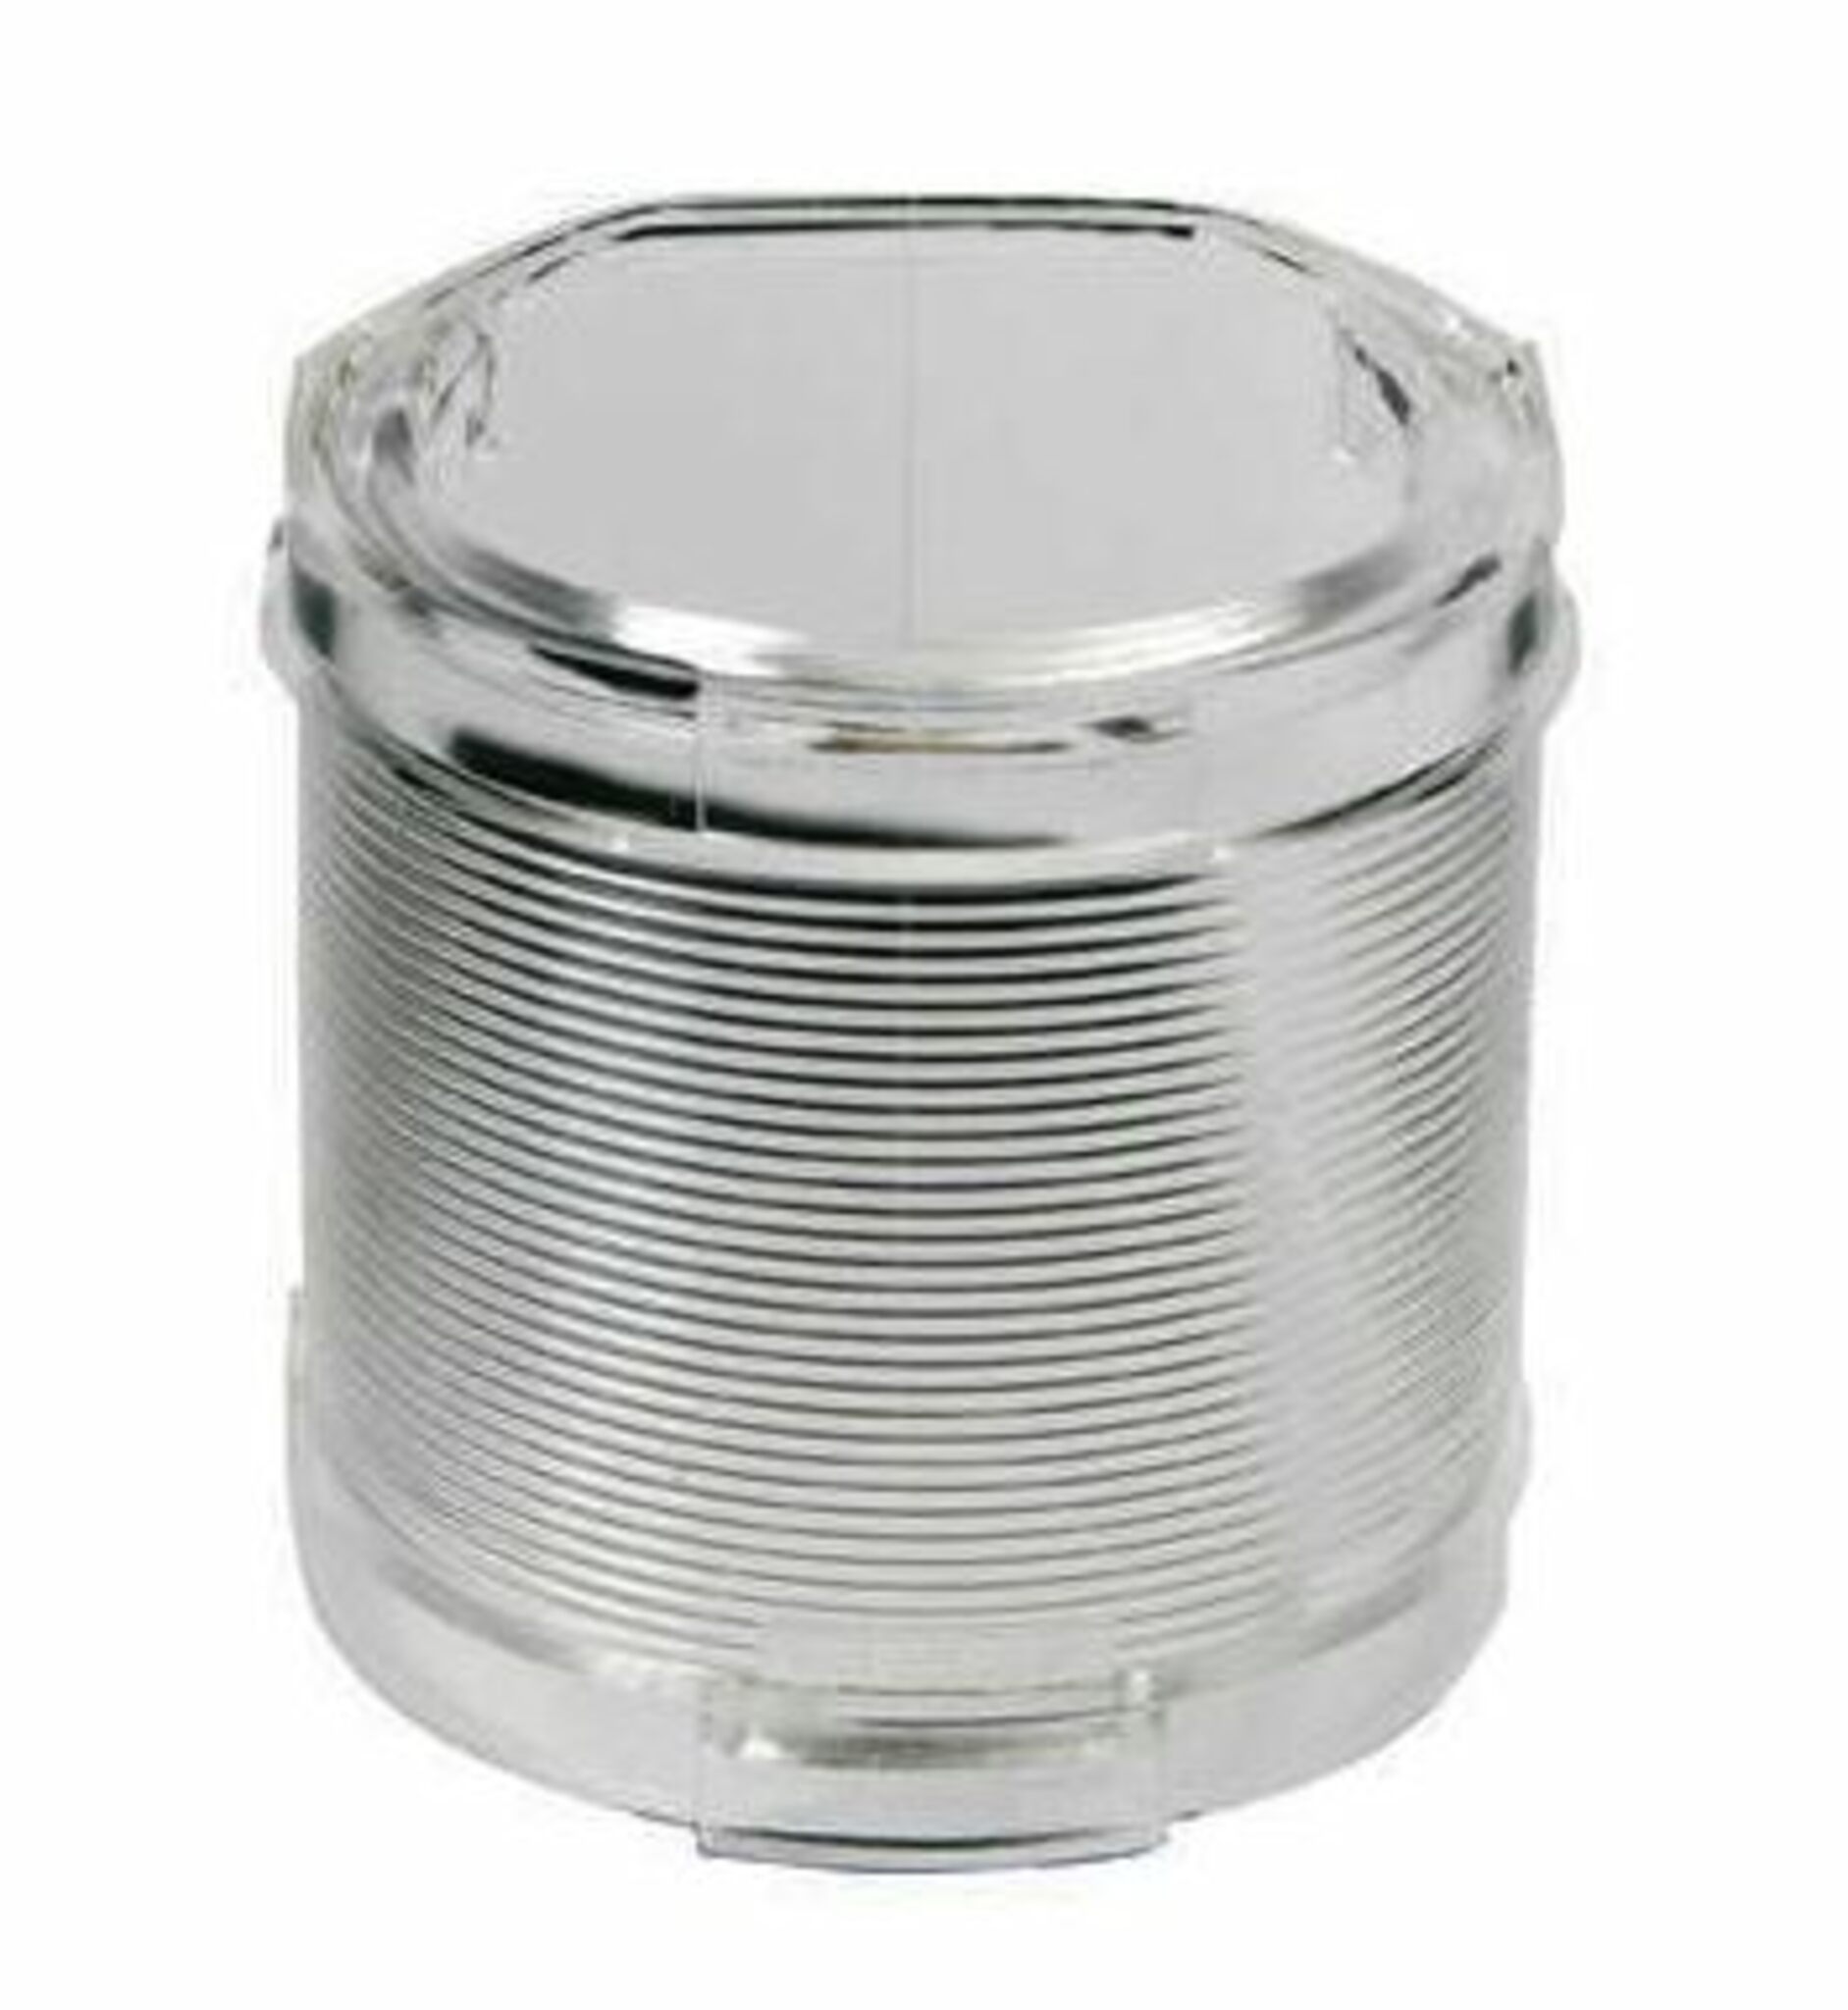 Peters Bey replacement lens for top or rear lantern series 410